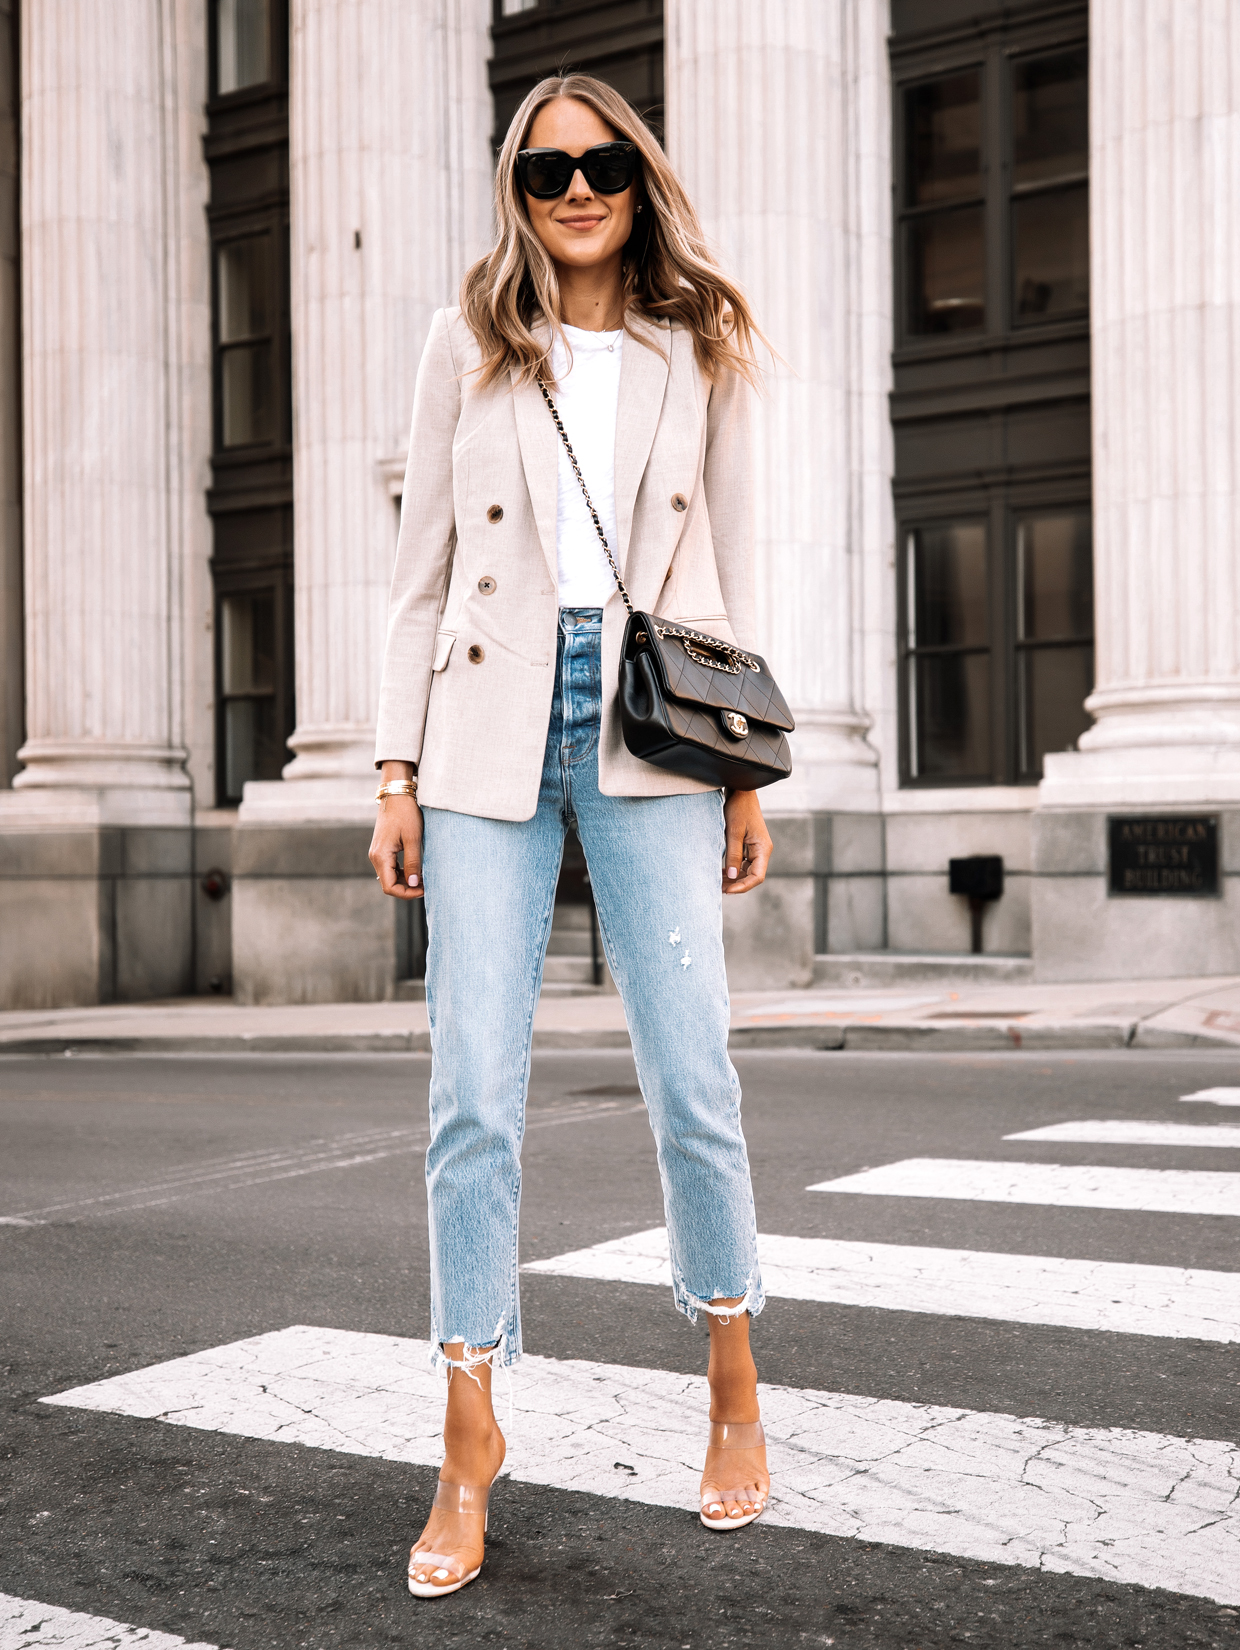 How to Style a Beige Blazer for a Casual Spring Outfit - Fashion Jackson